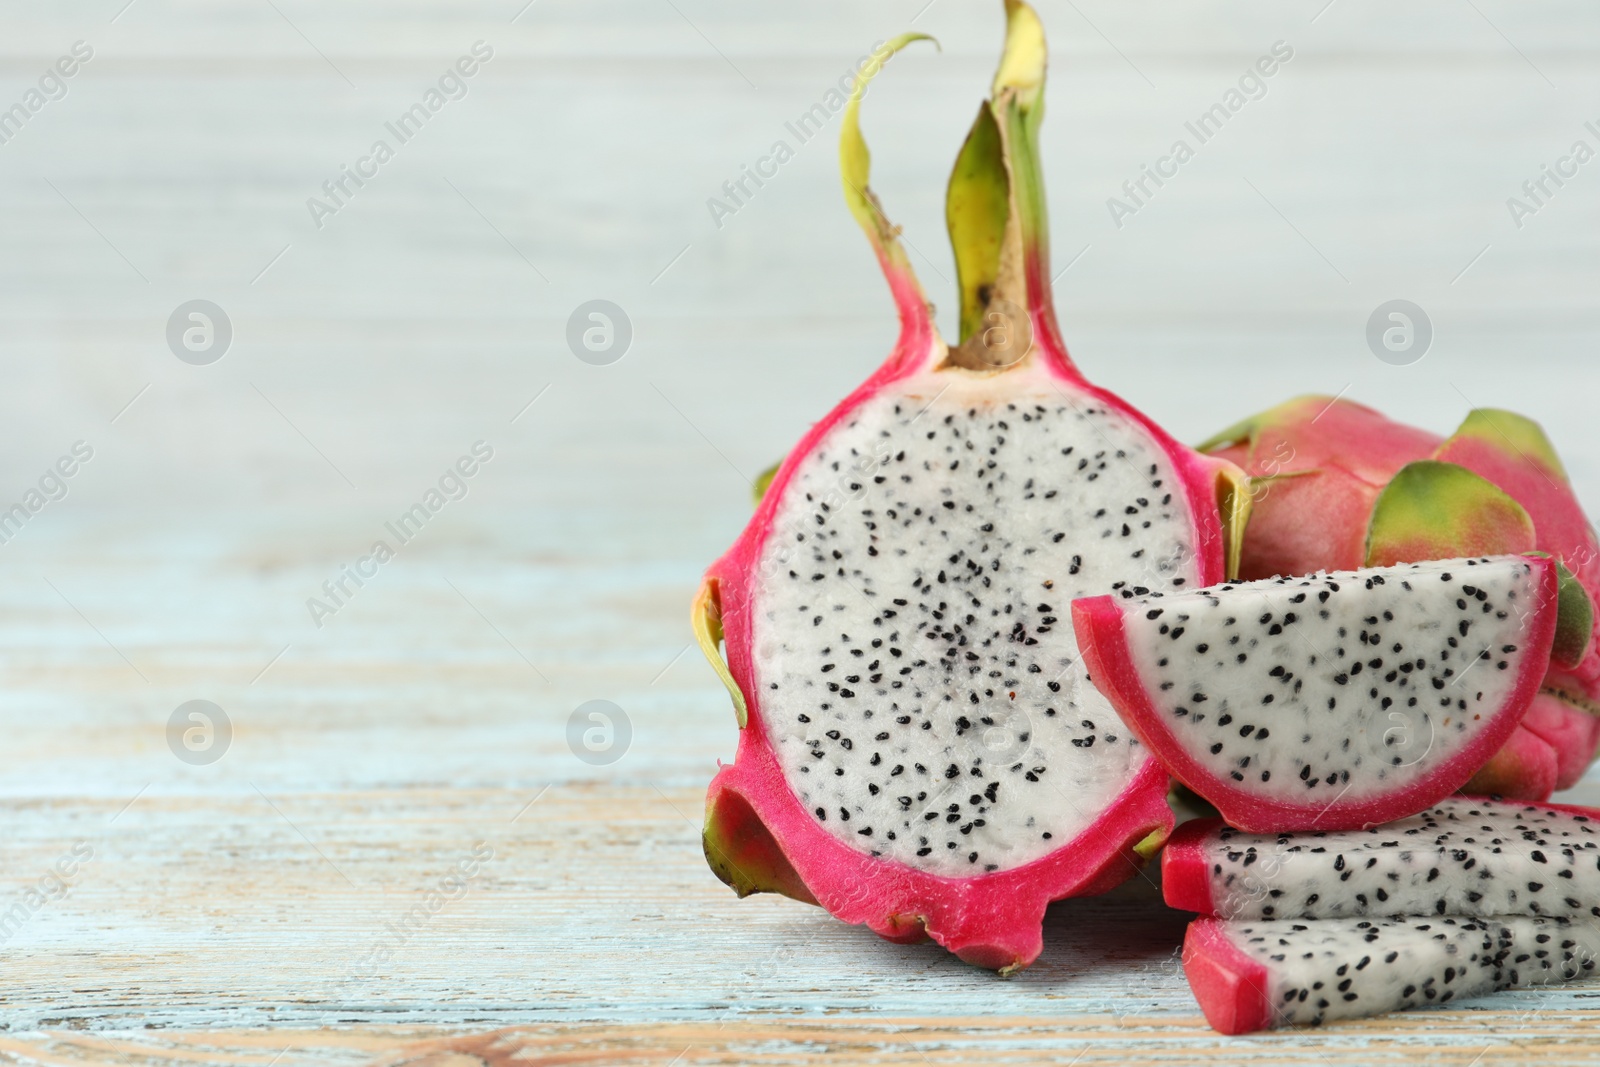 Photo of Delicious cut and whole dragon fruits (pitahaya) on light wooden table. Space for text